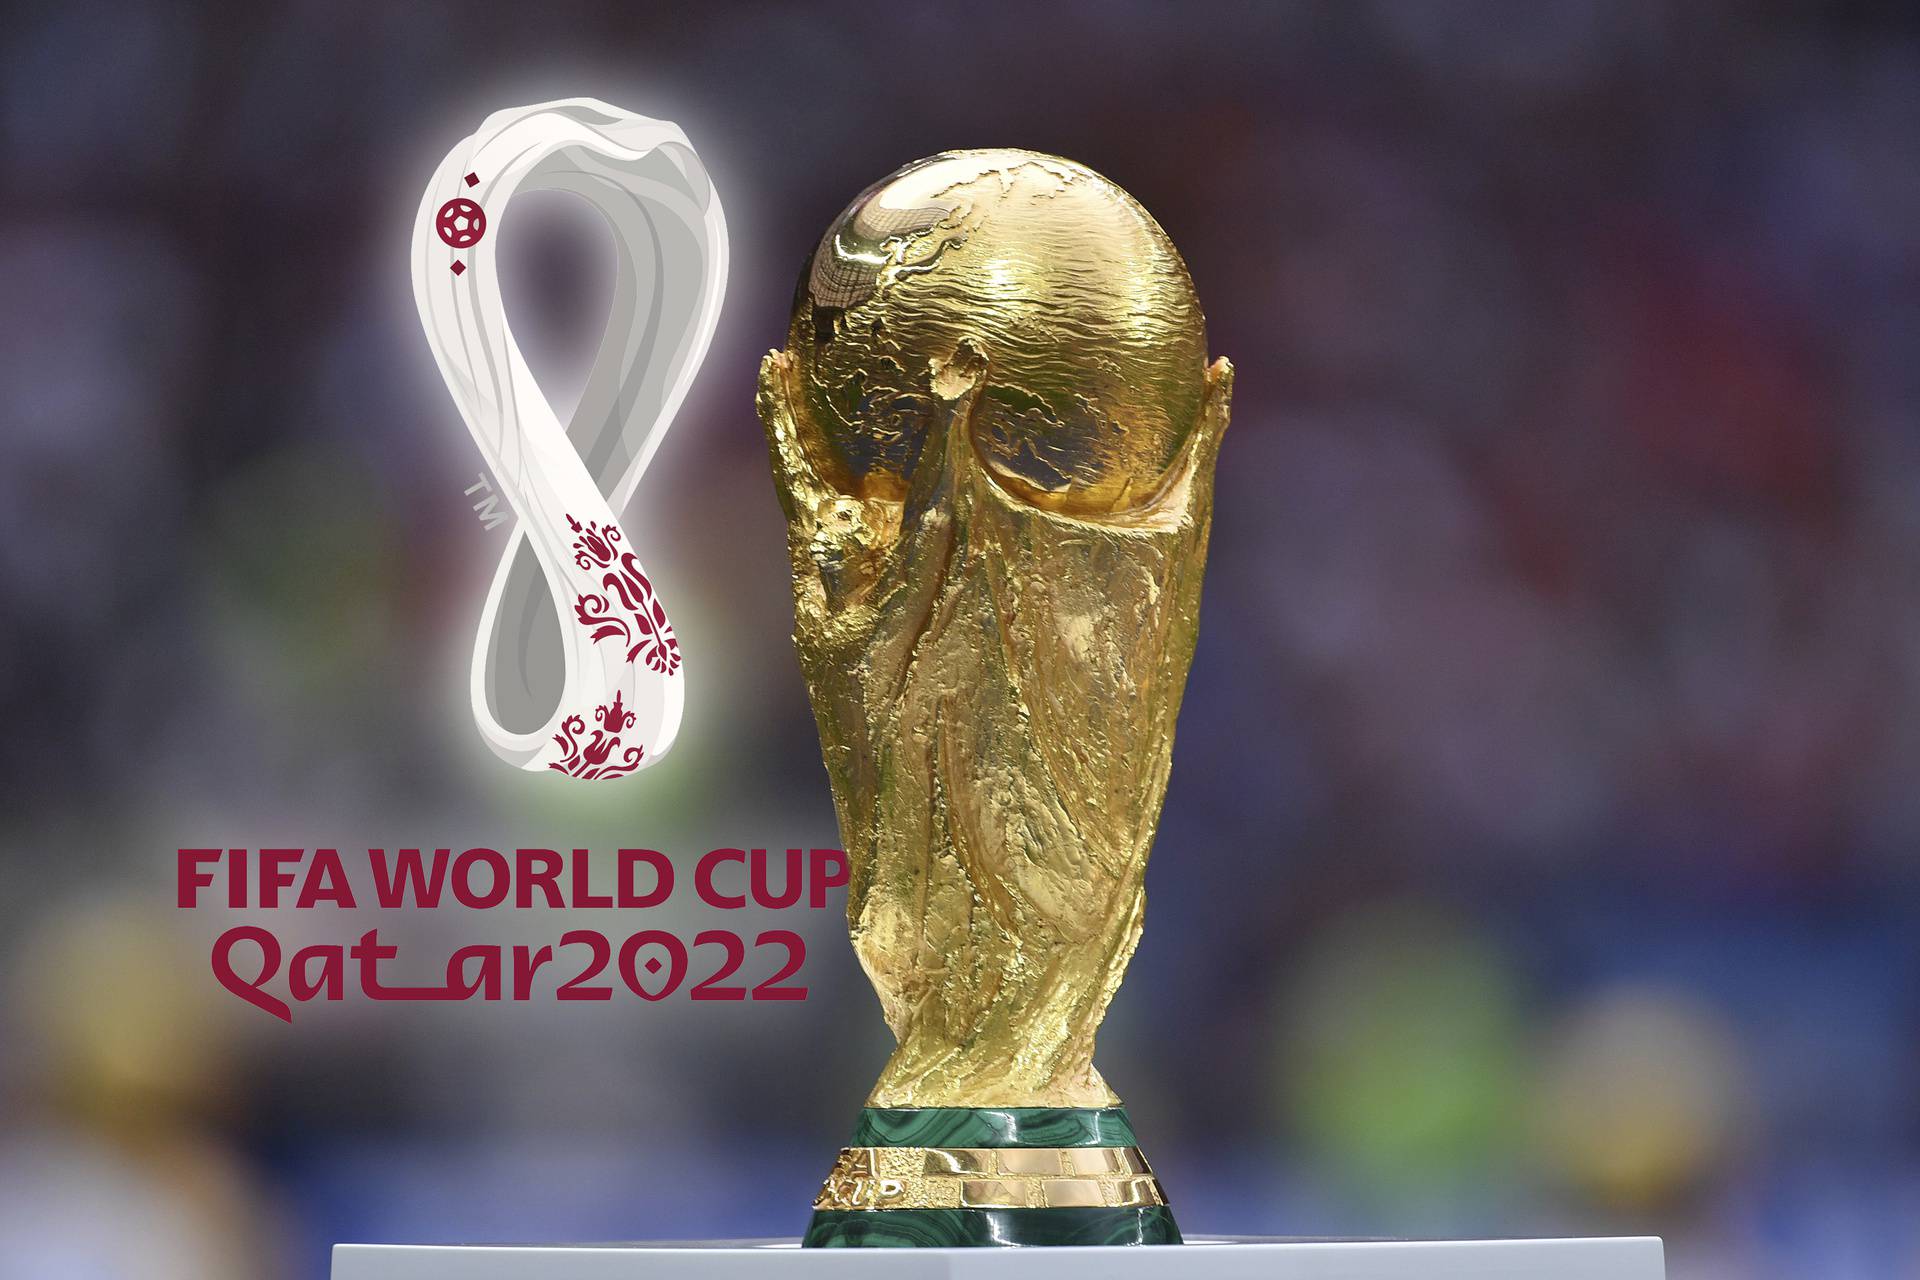 FIFA World Cup 2022 Group Draw on 04/01/2022 in Doha.